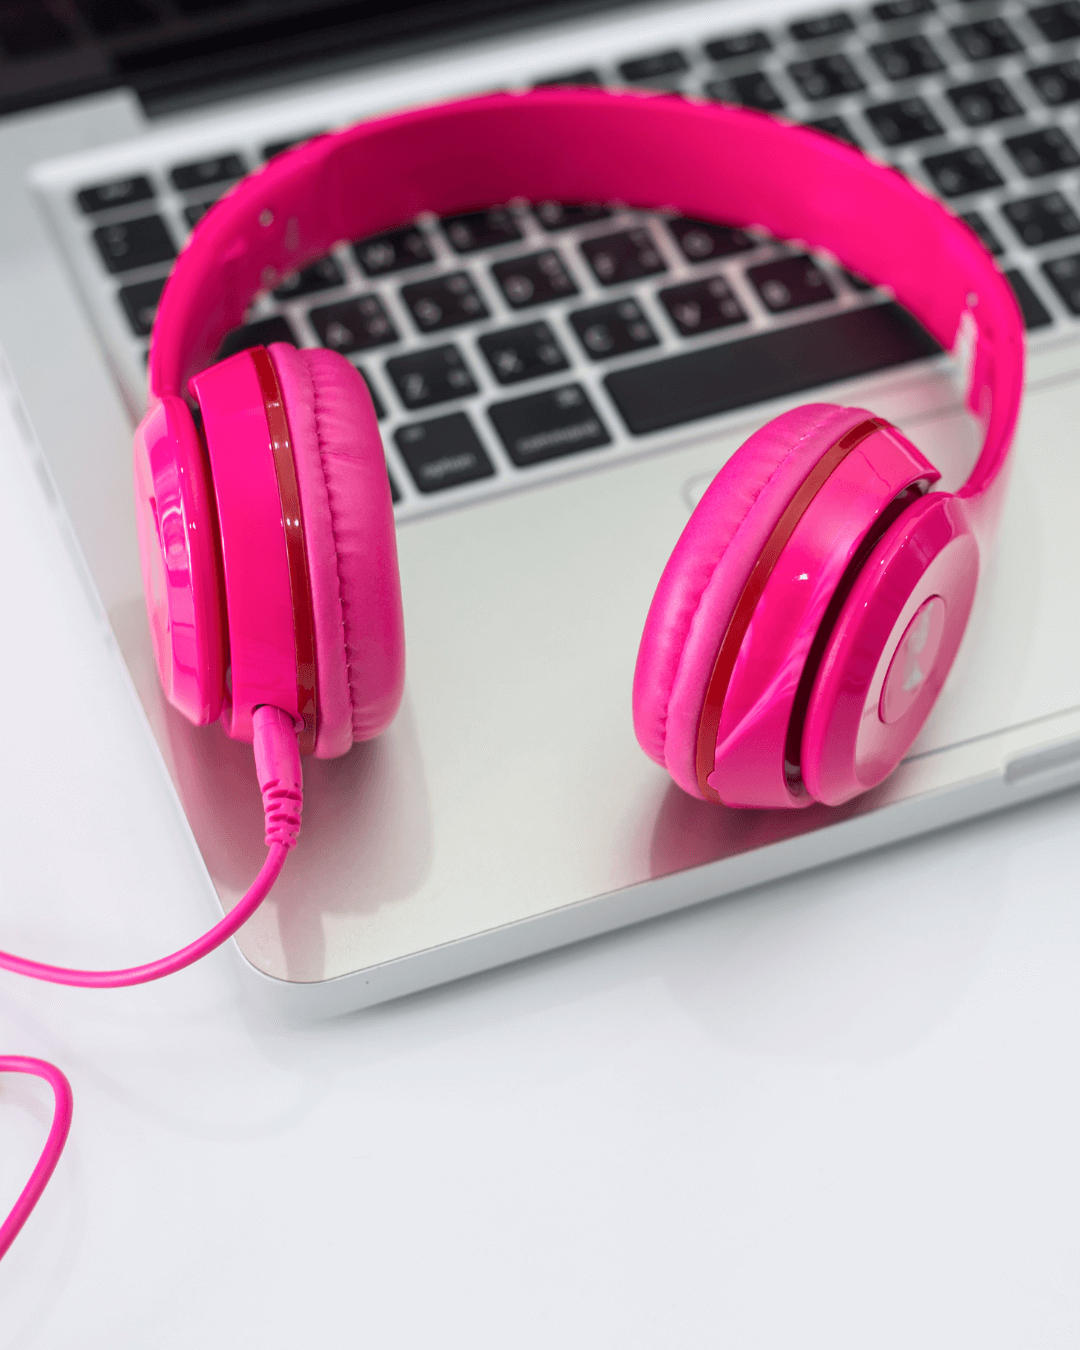 Silver laptop with hot pink headphones